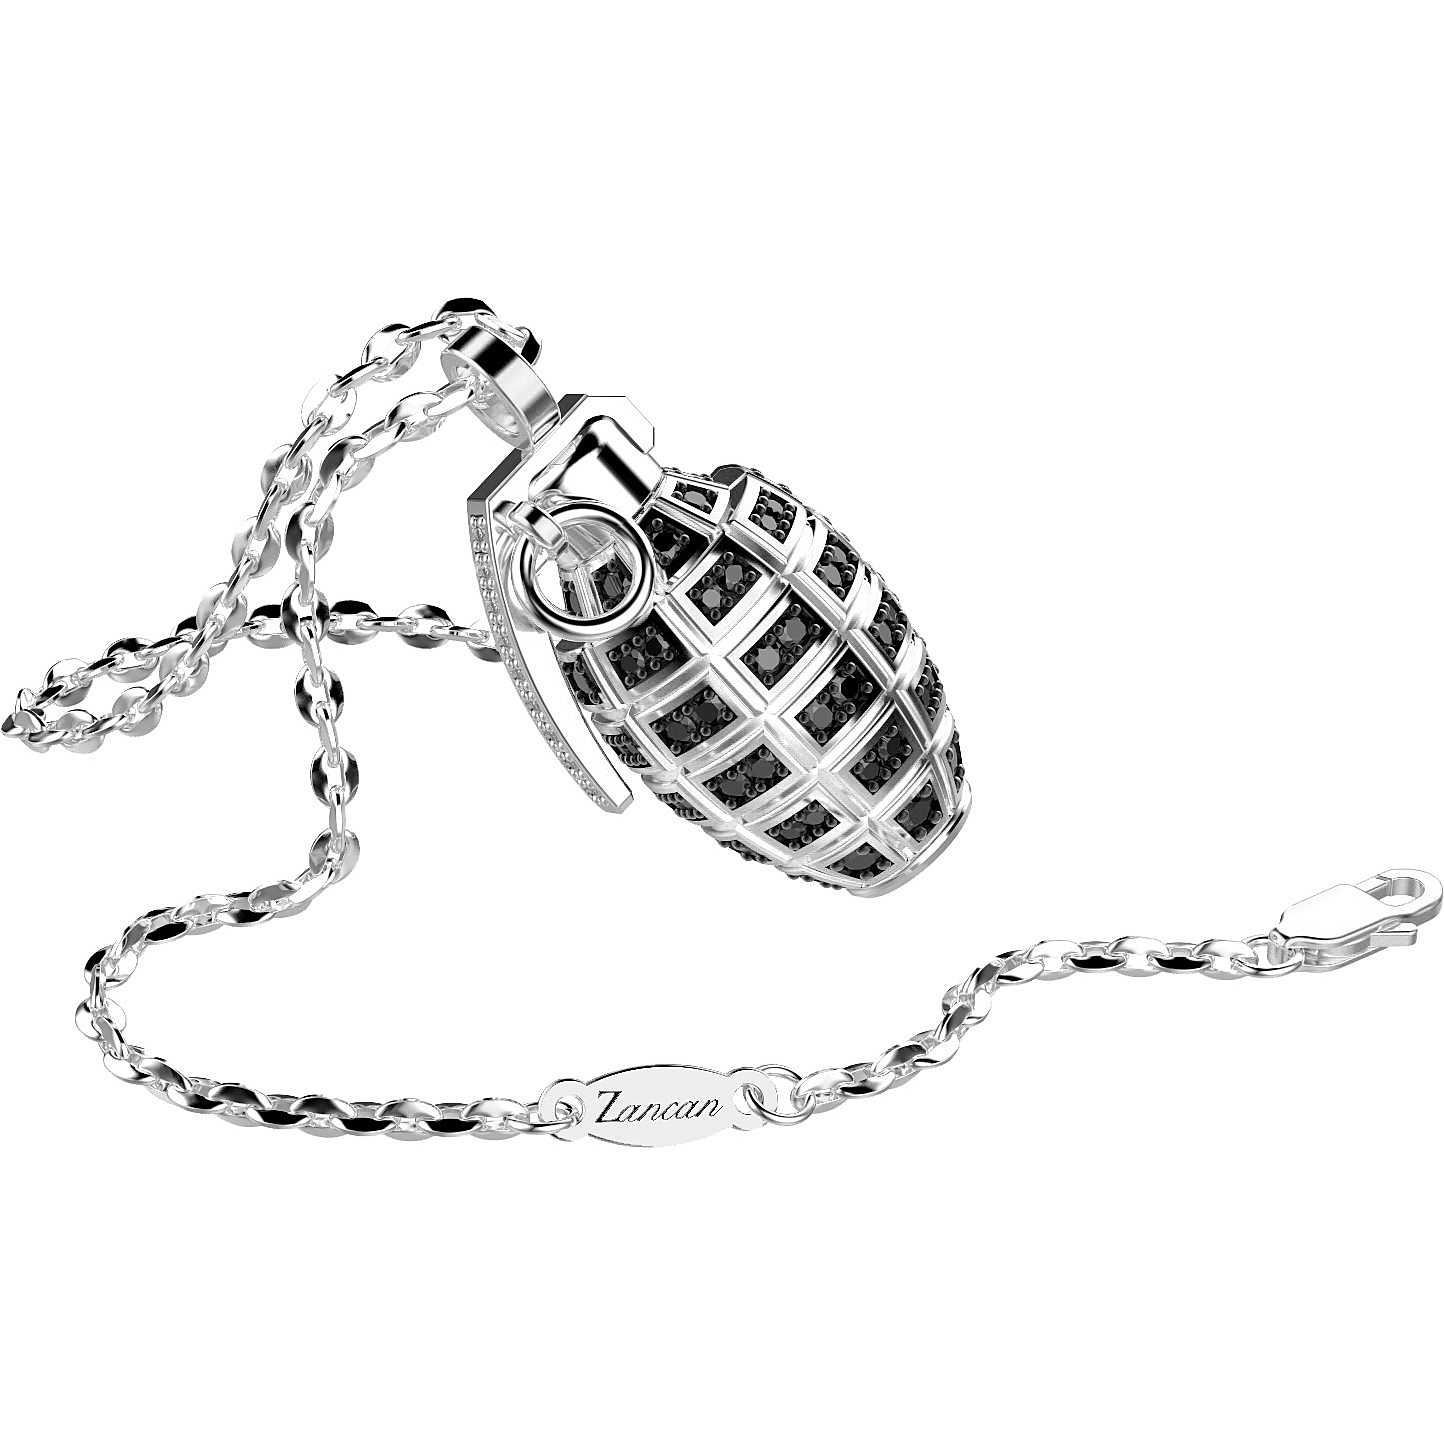 Grenade Charm with Black Spinels Necklace | Zancan | Luby 